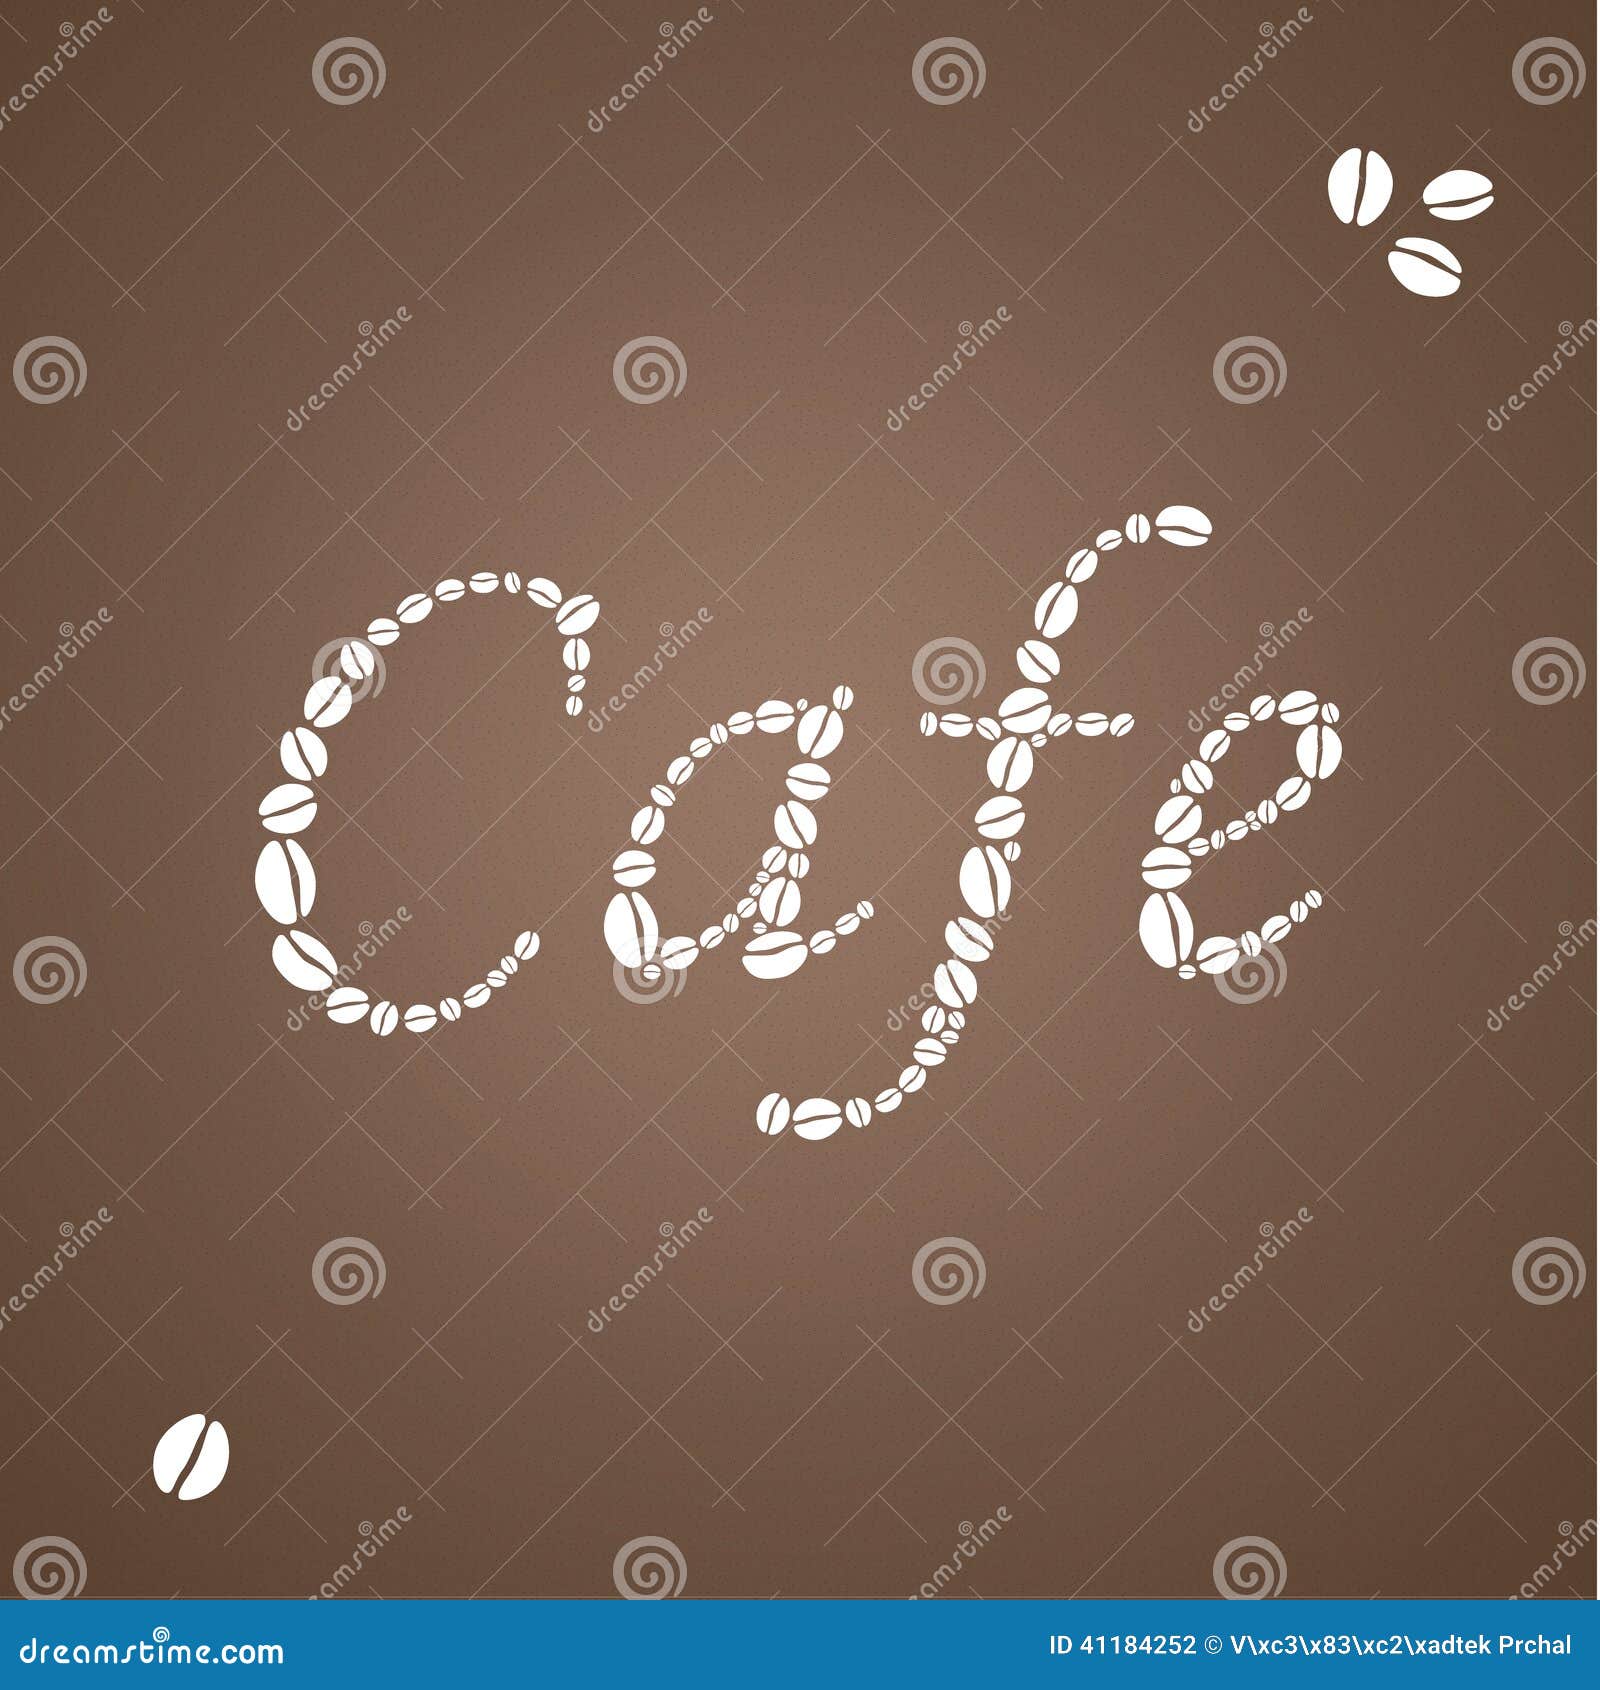 brown coffee background with white insignia composed from shilouette of coffee beans.